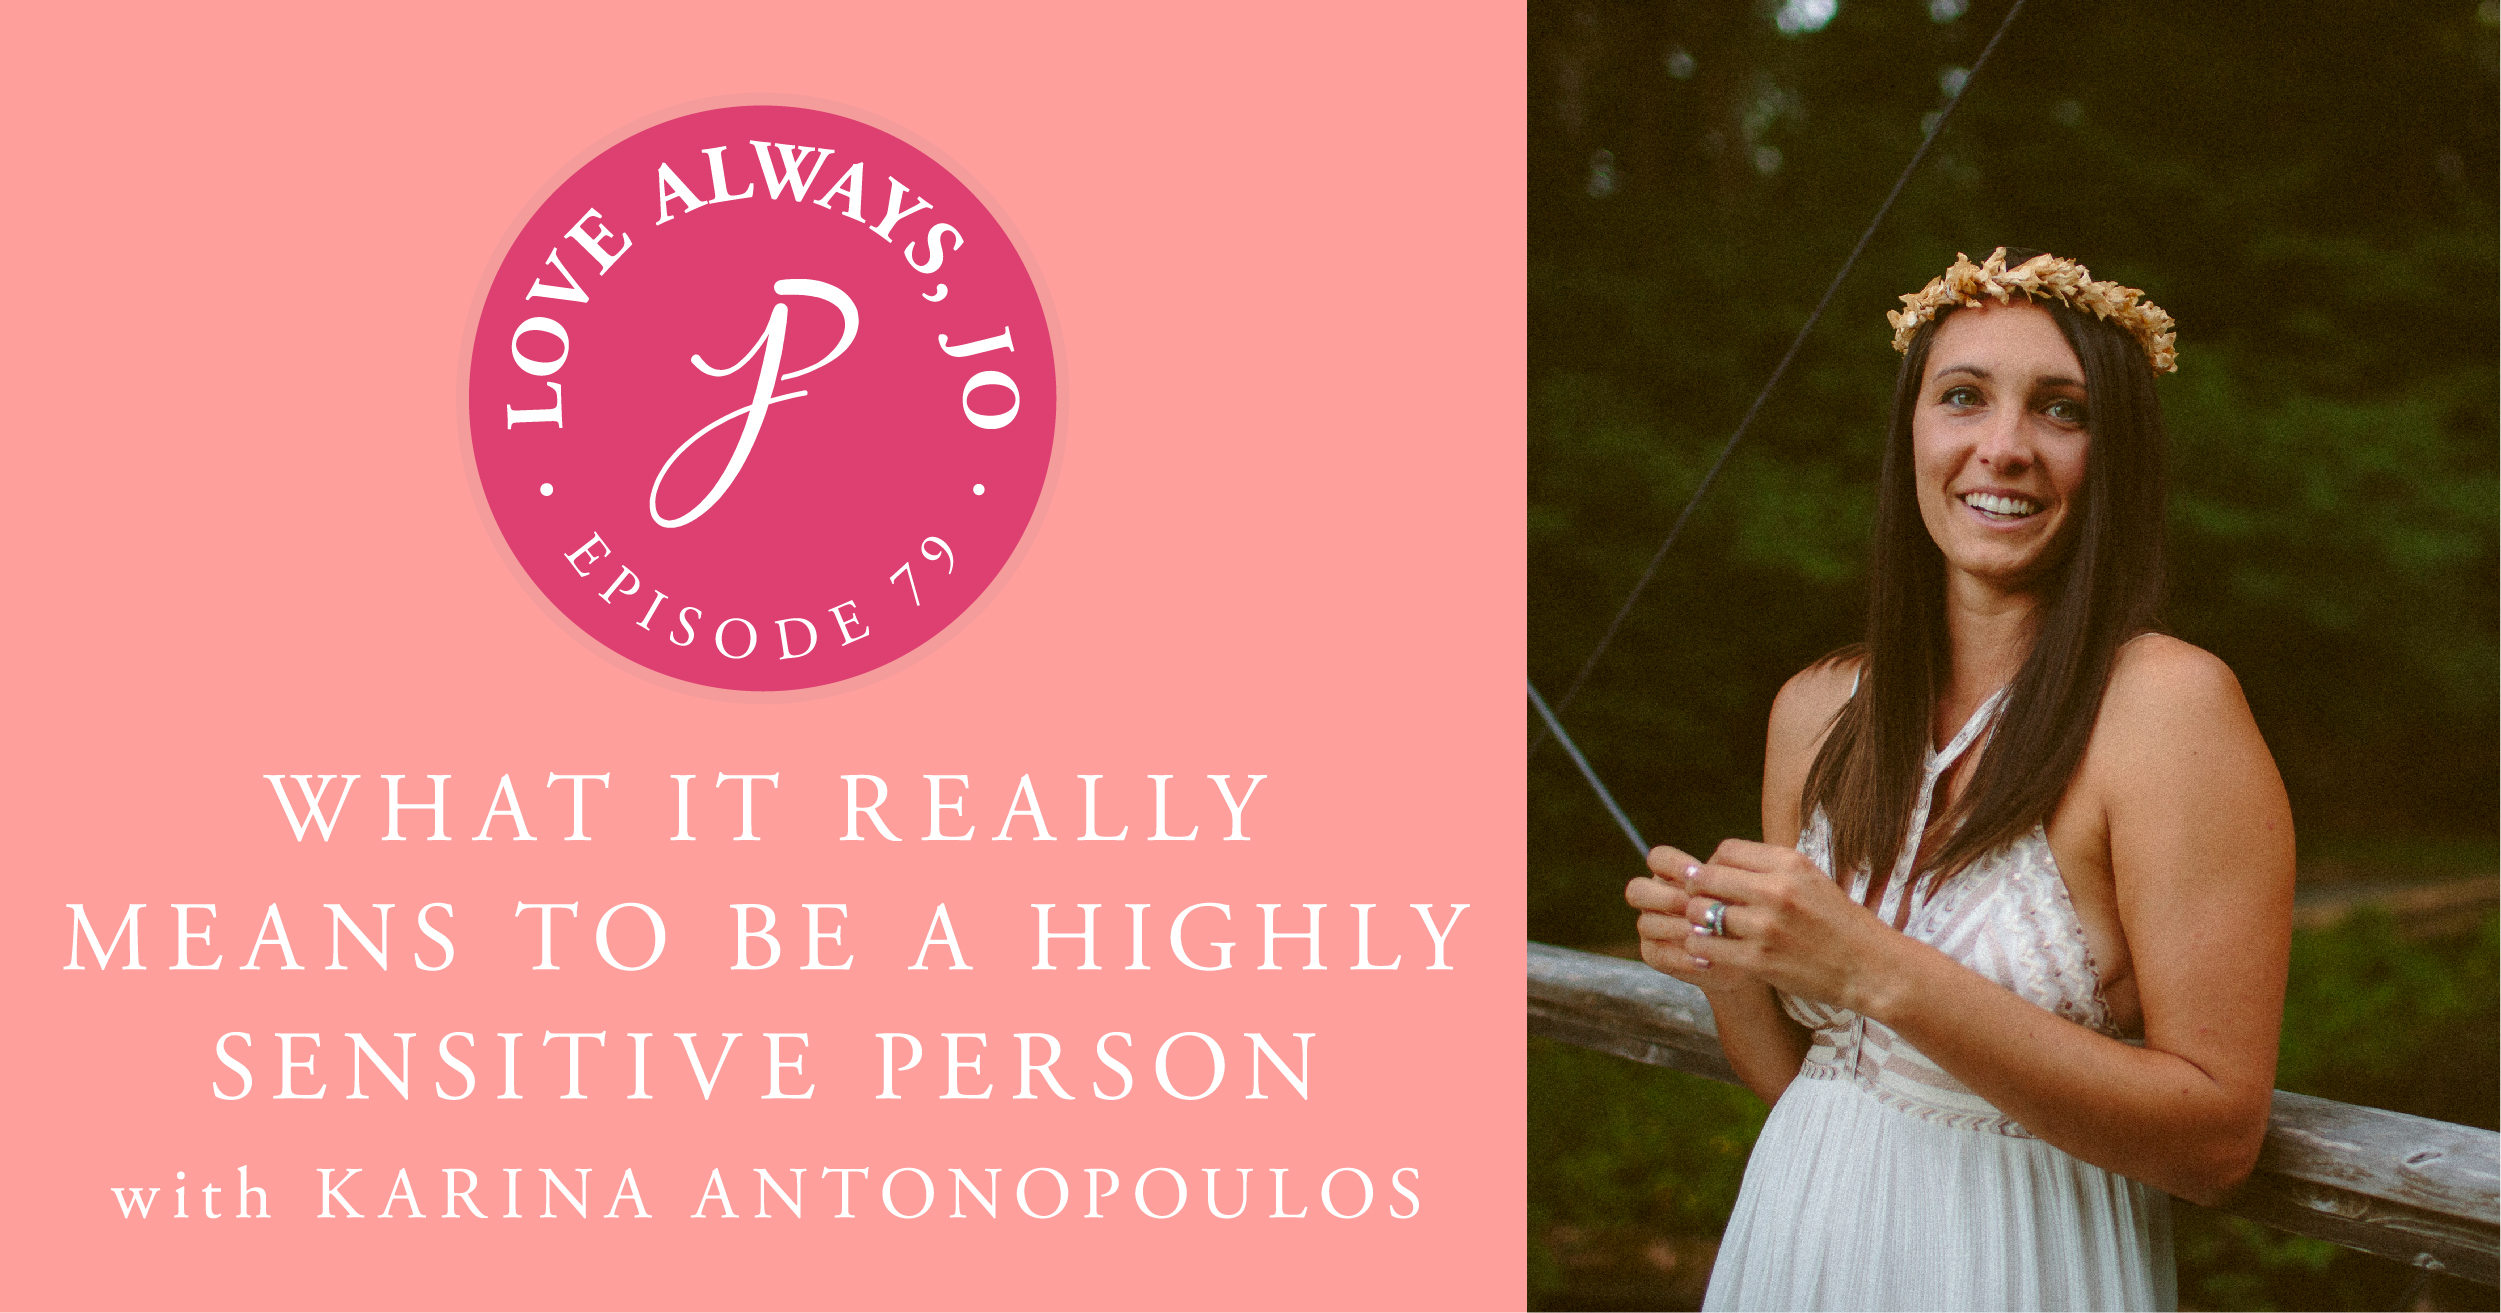 What It Really Means to Be a Highly Sensitive Person with Karina Antonopoulos | Love Always Jo Episode 79 